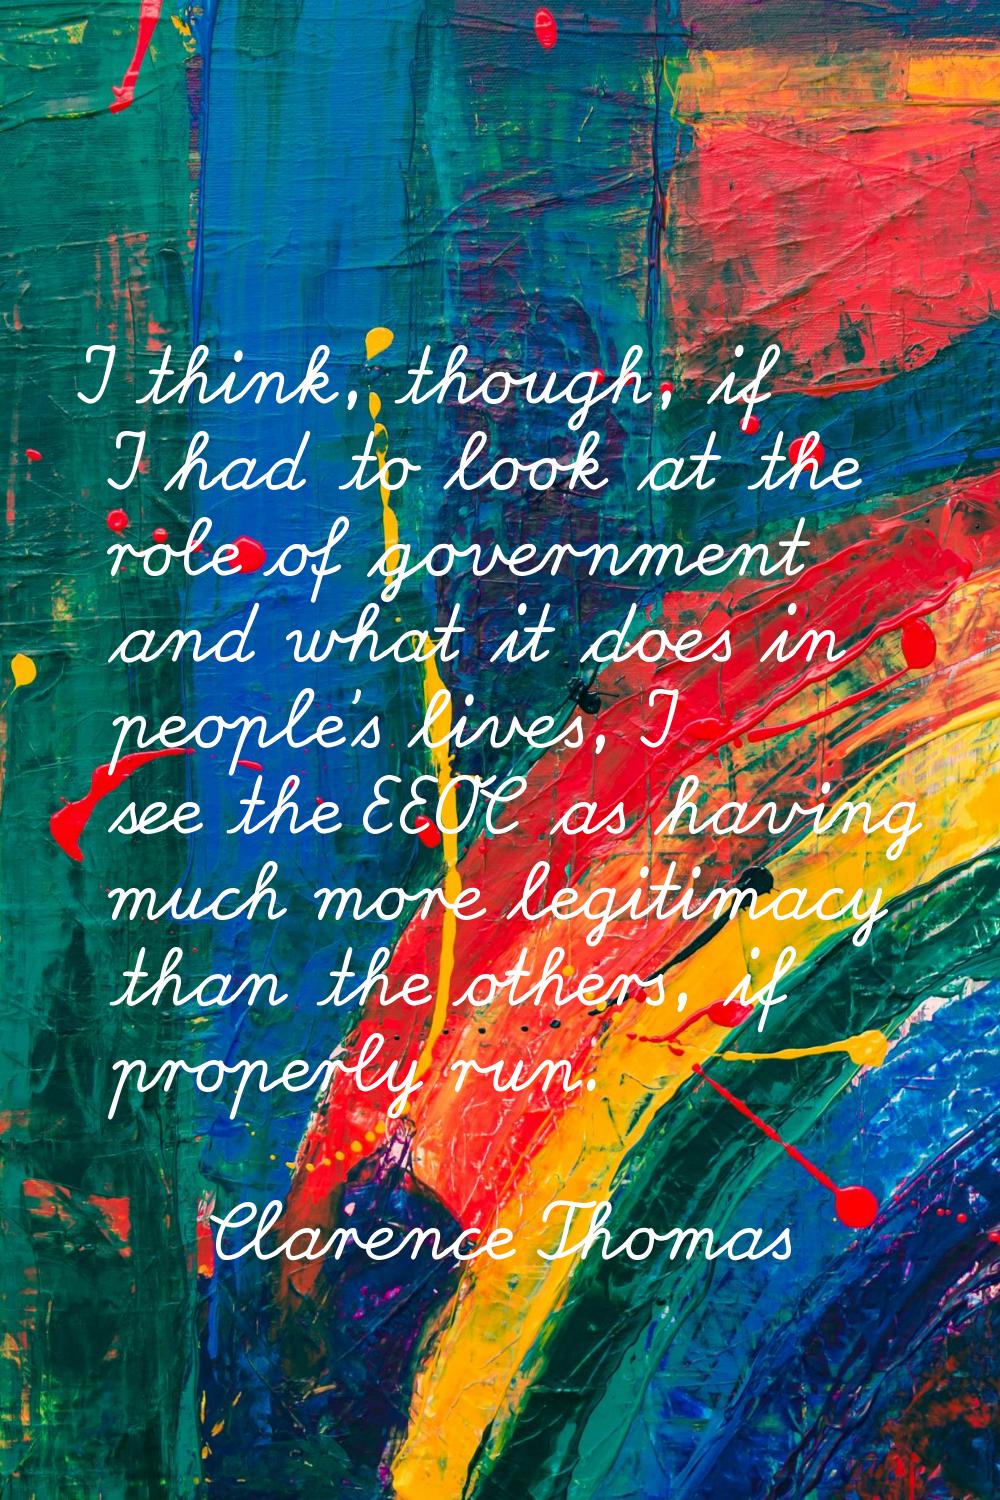 I think, though, if I had to look at the role of government and what it does in people's lives, I s